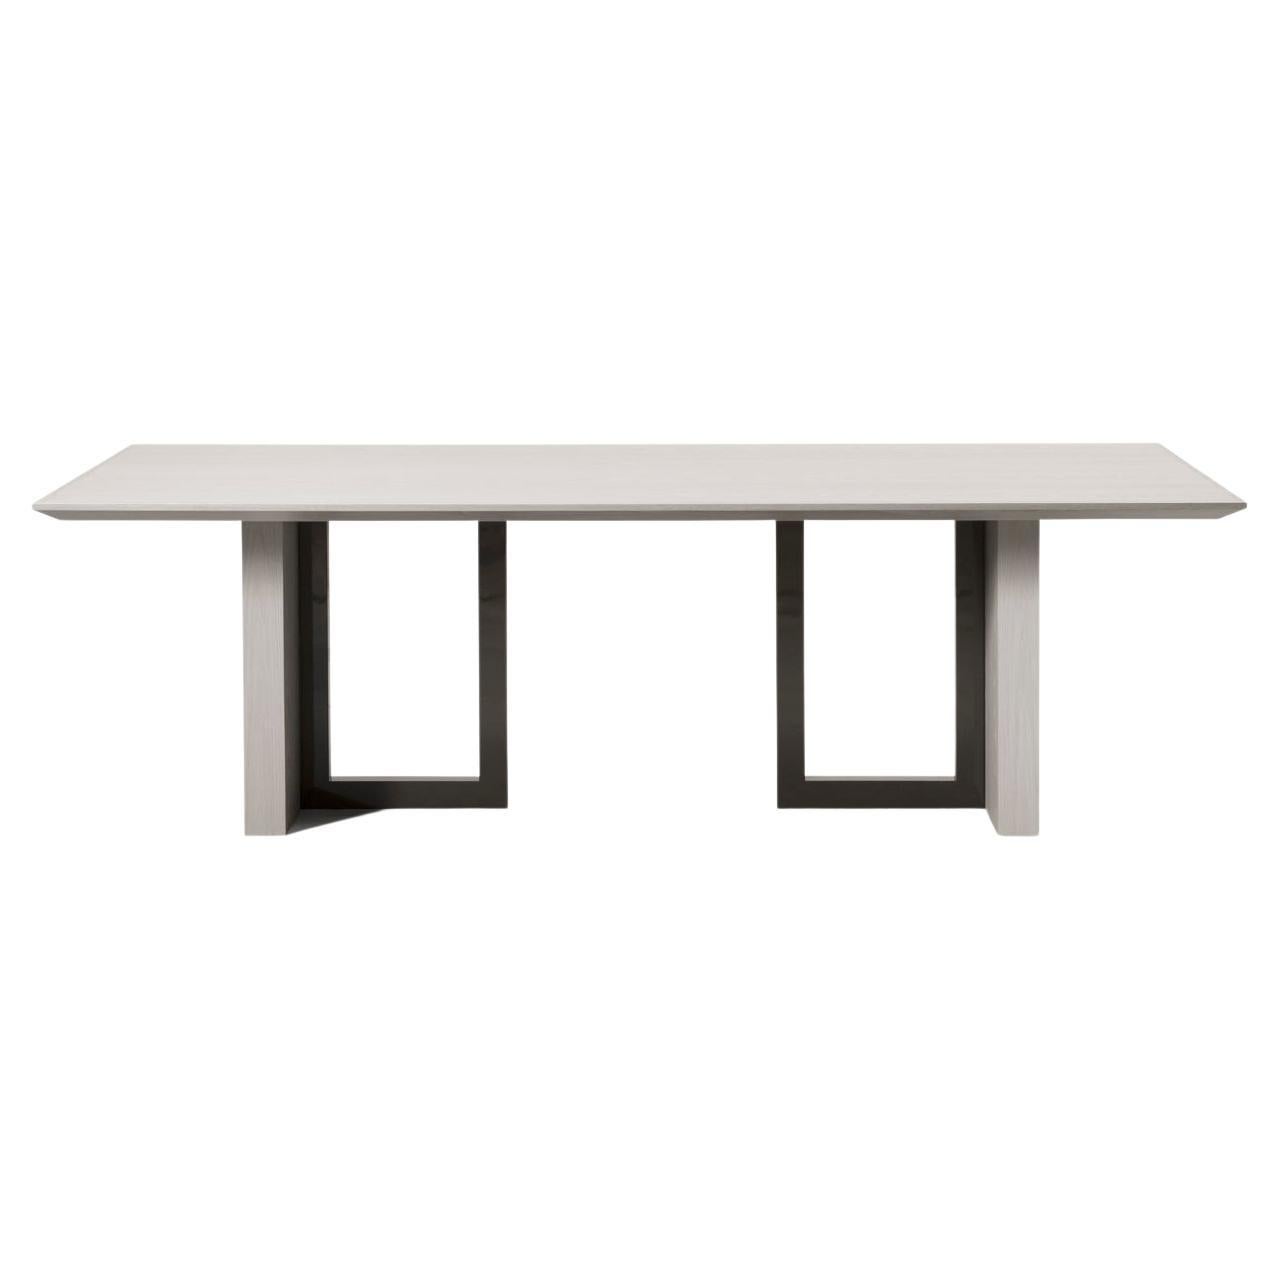 Monterrey Dining Table in Wood and Lacquer